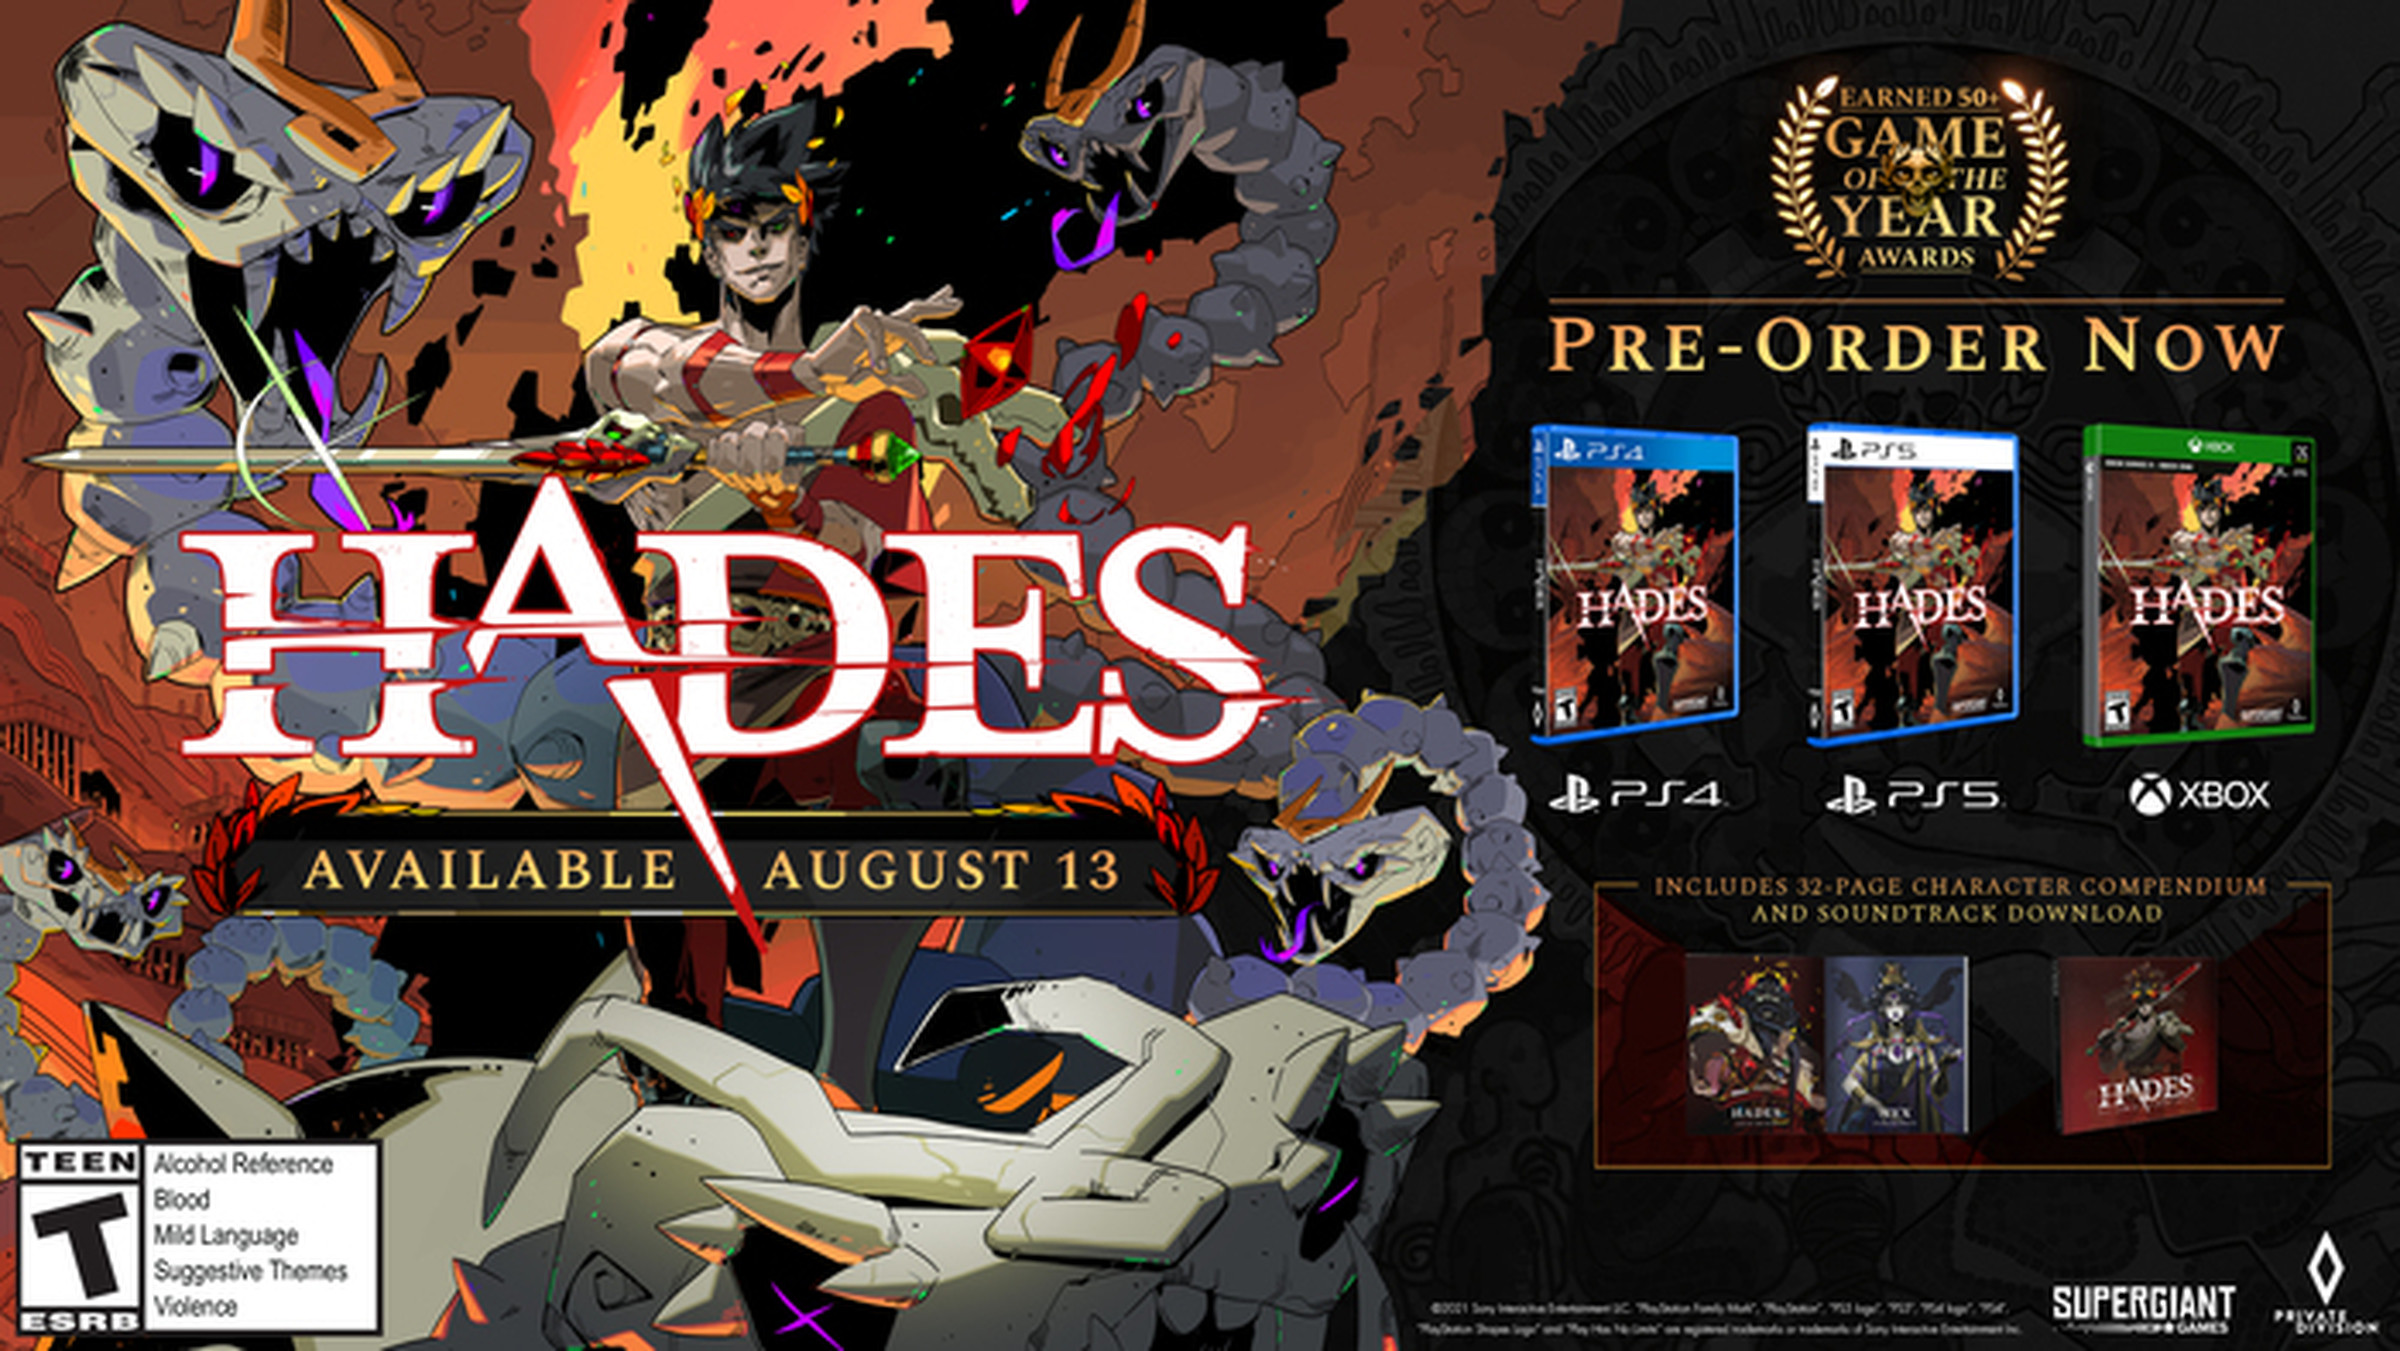 The upcoming physical versions of Hades.